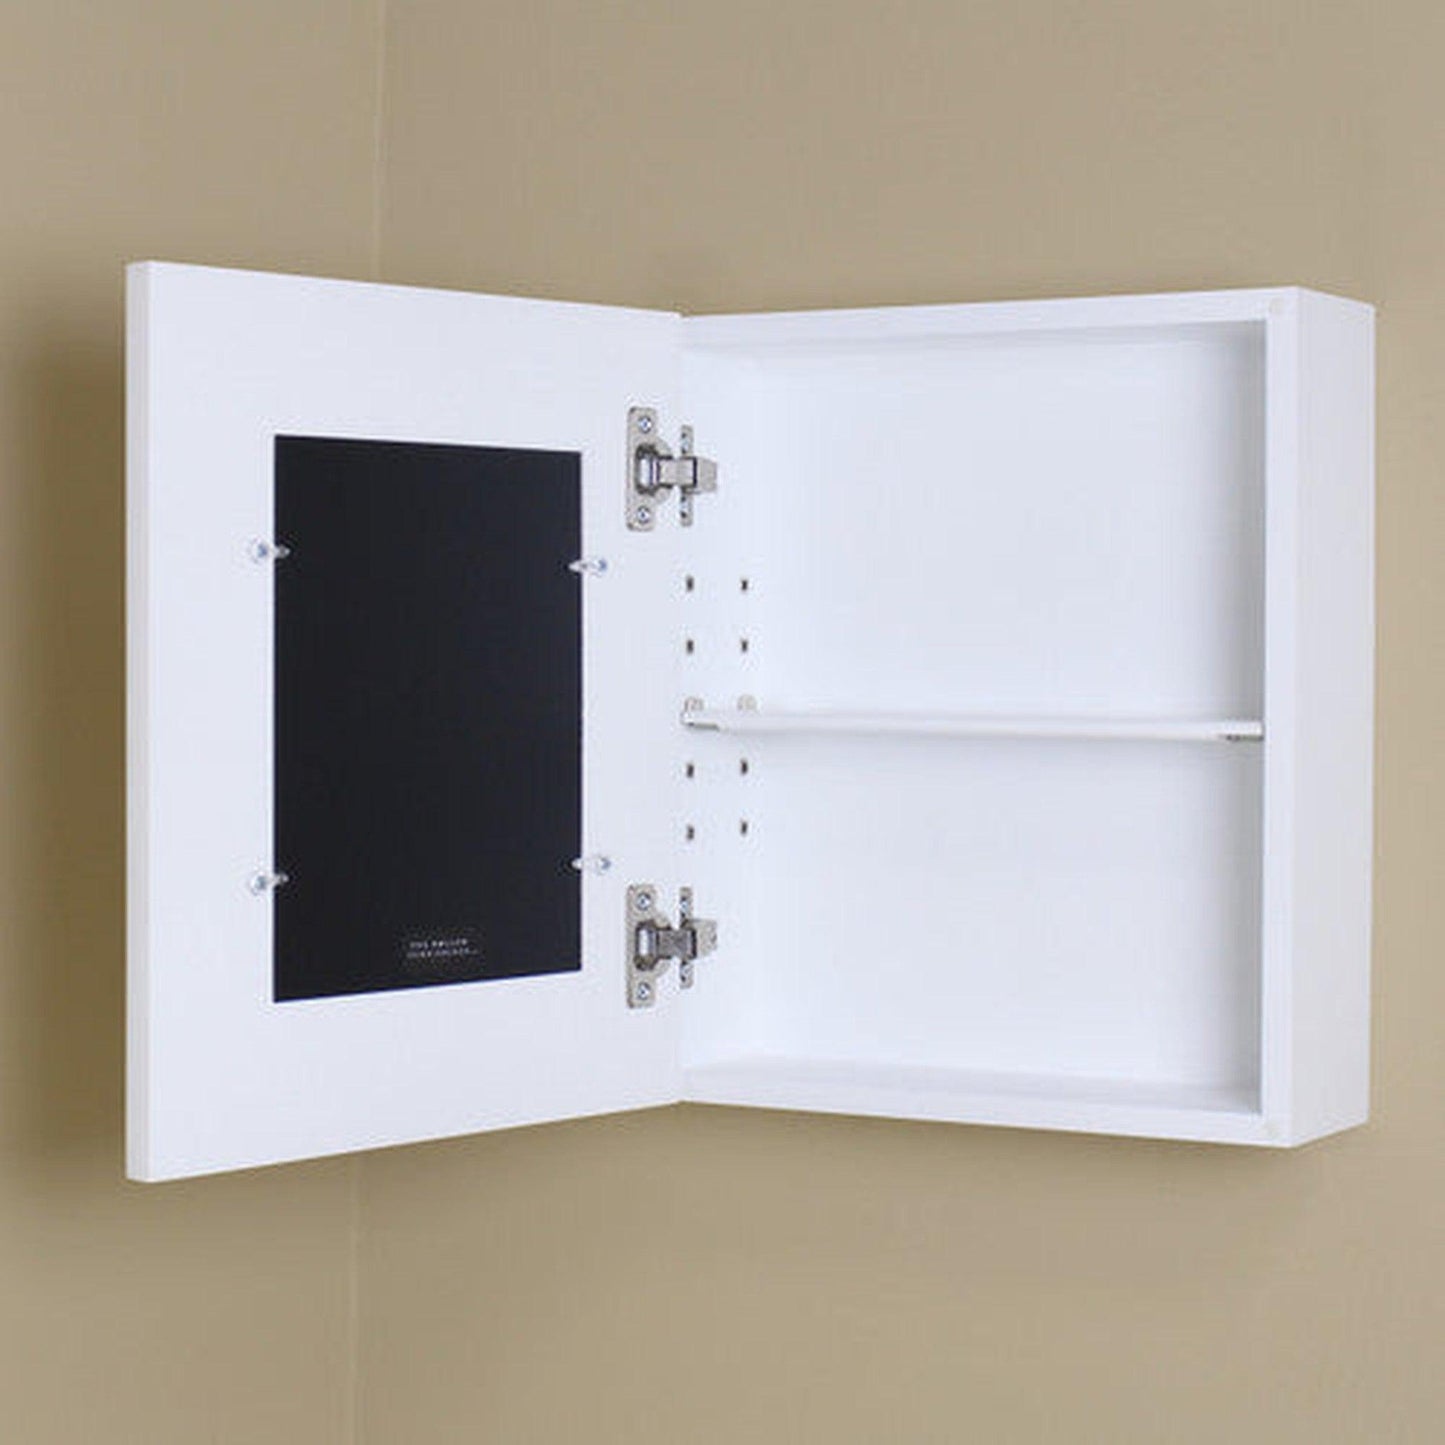 Fox Hollow Furnishings 15" H x 13" W White Shaker Wall Mount Picture Frame Medicine Cabinet With White 5" x 7" Matting